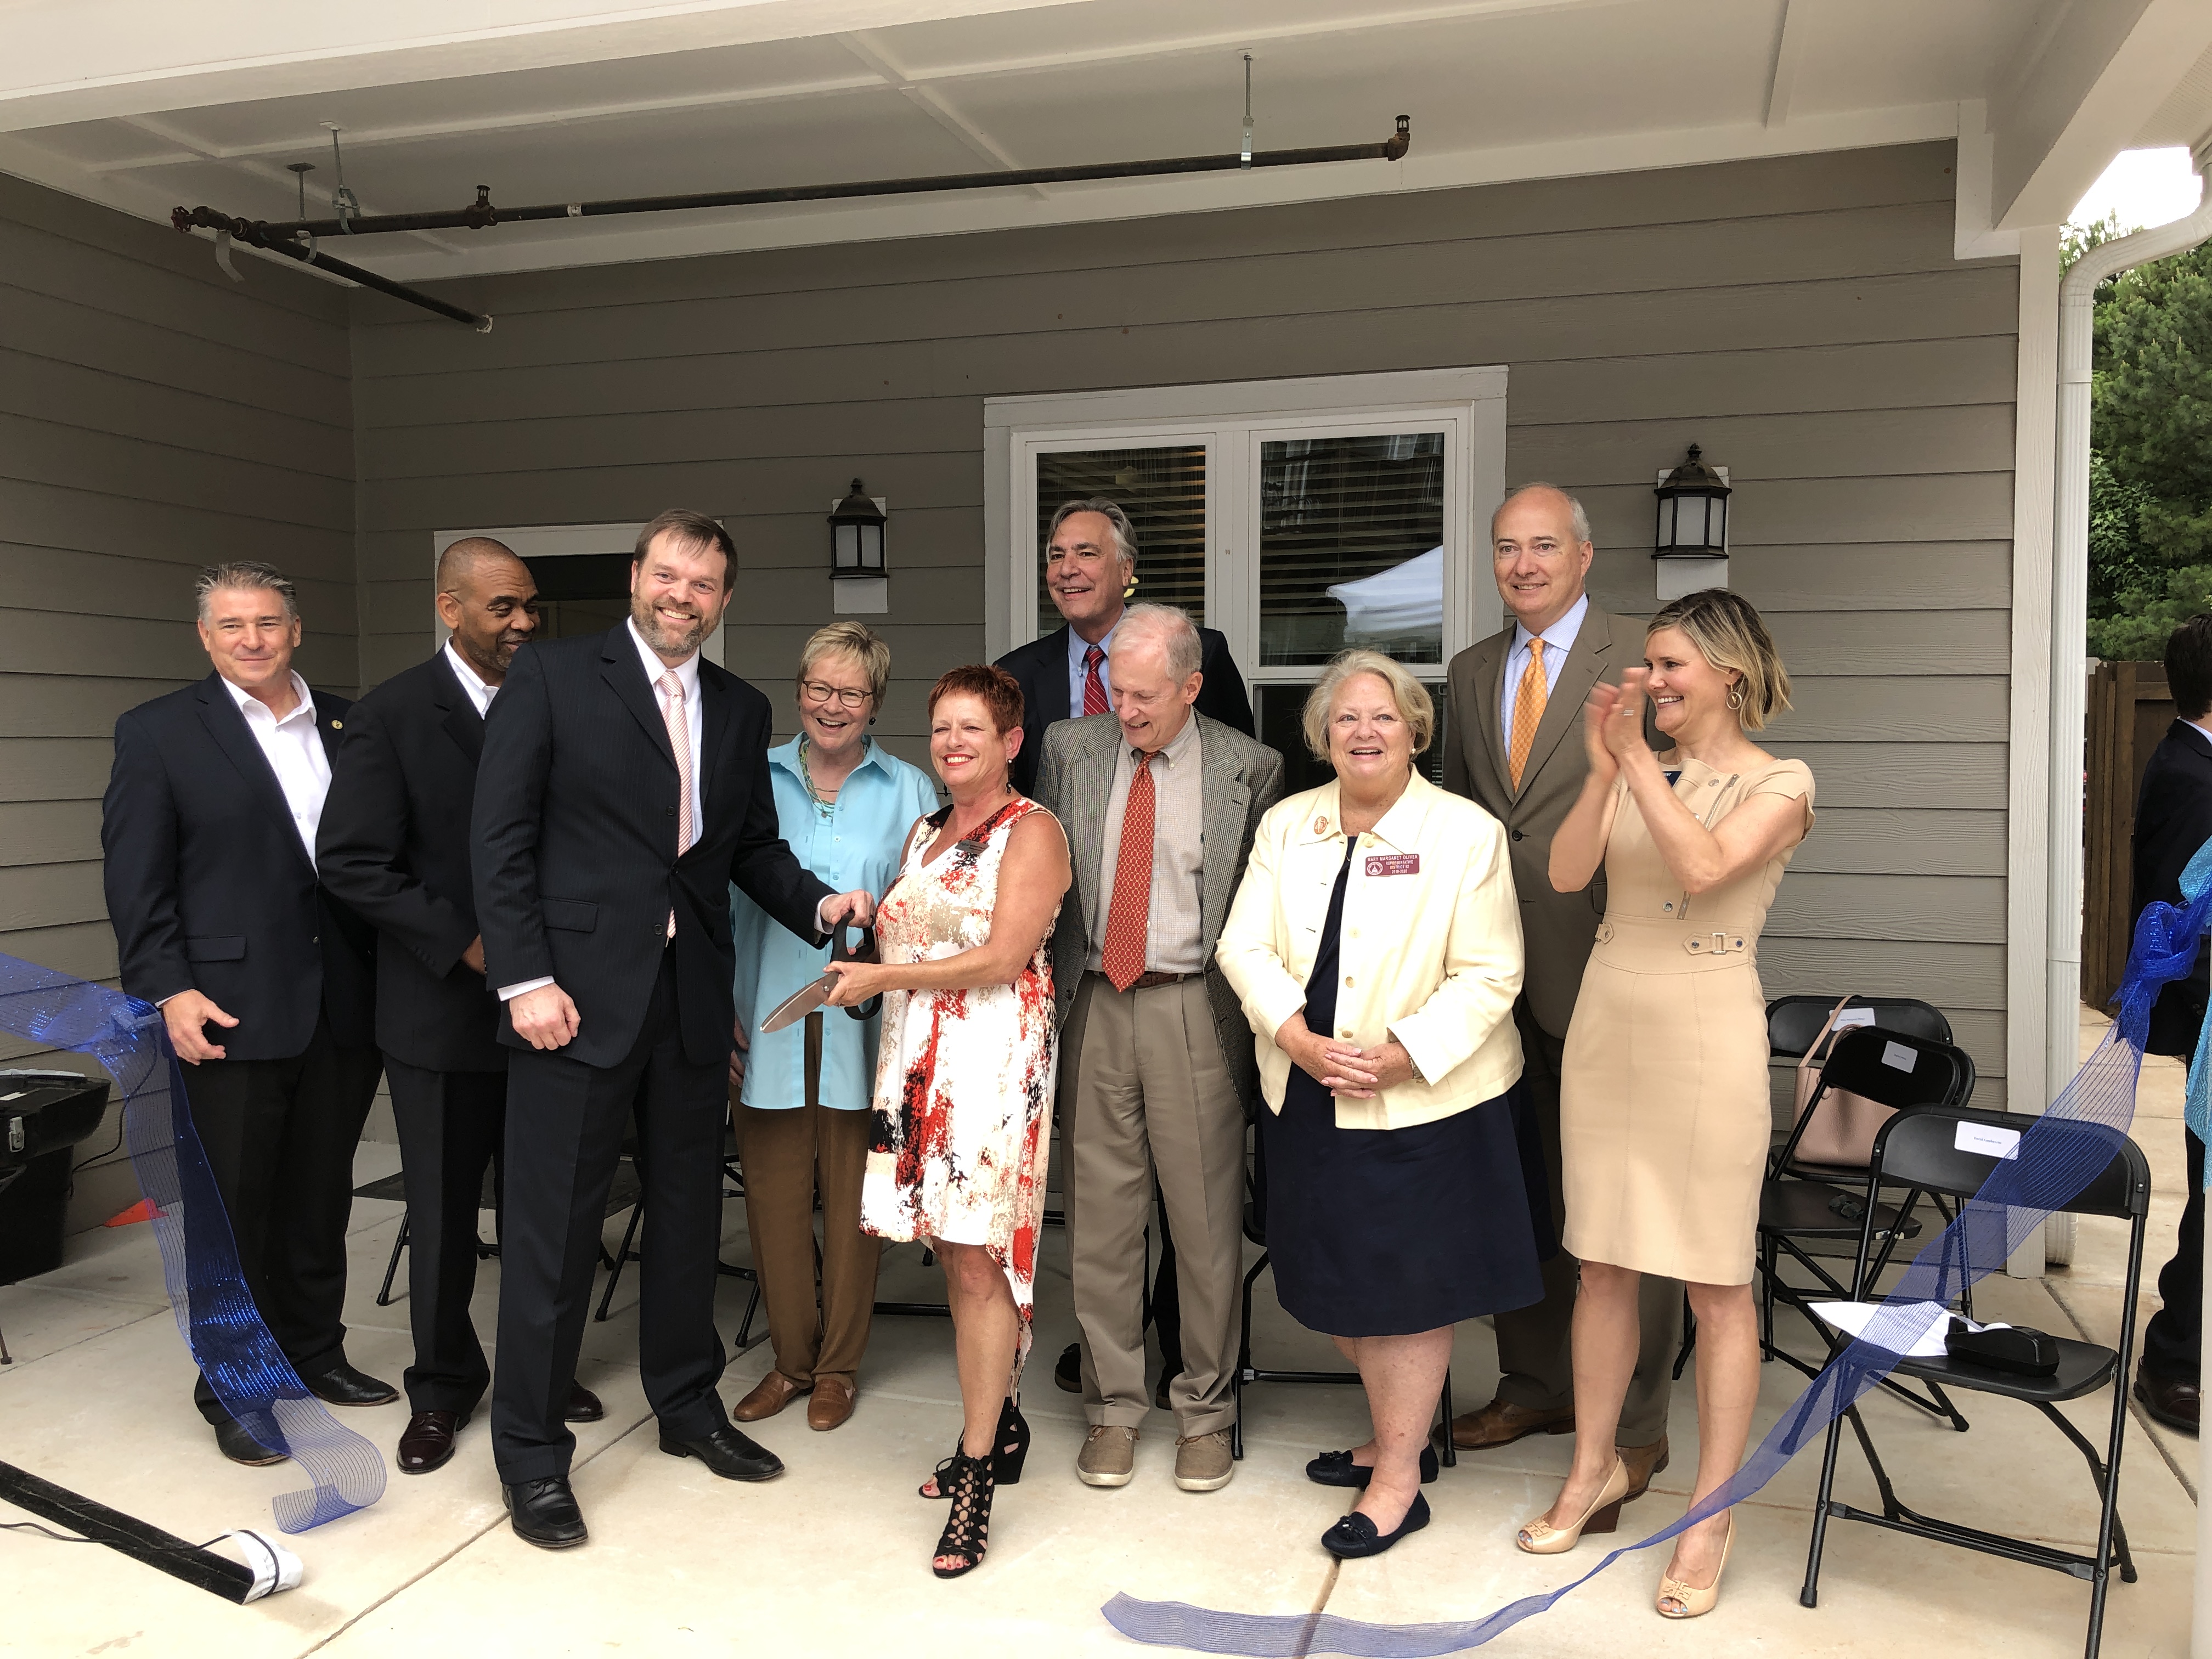 3Keys CEO Darlene Schultz is surrounded by state legislators and government officials during the Rosalynn Apartments reopening ceremony. 